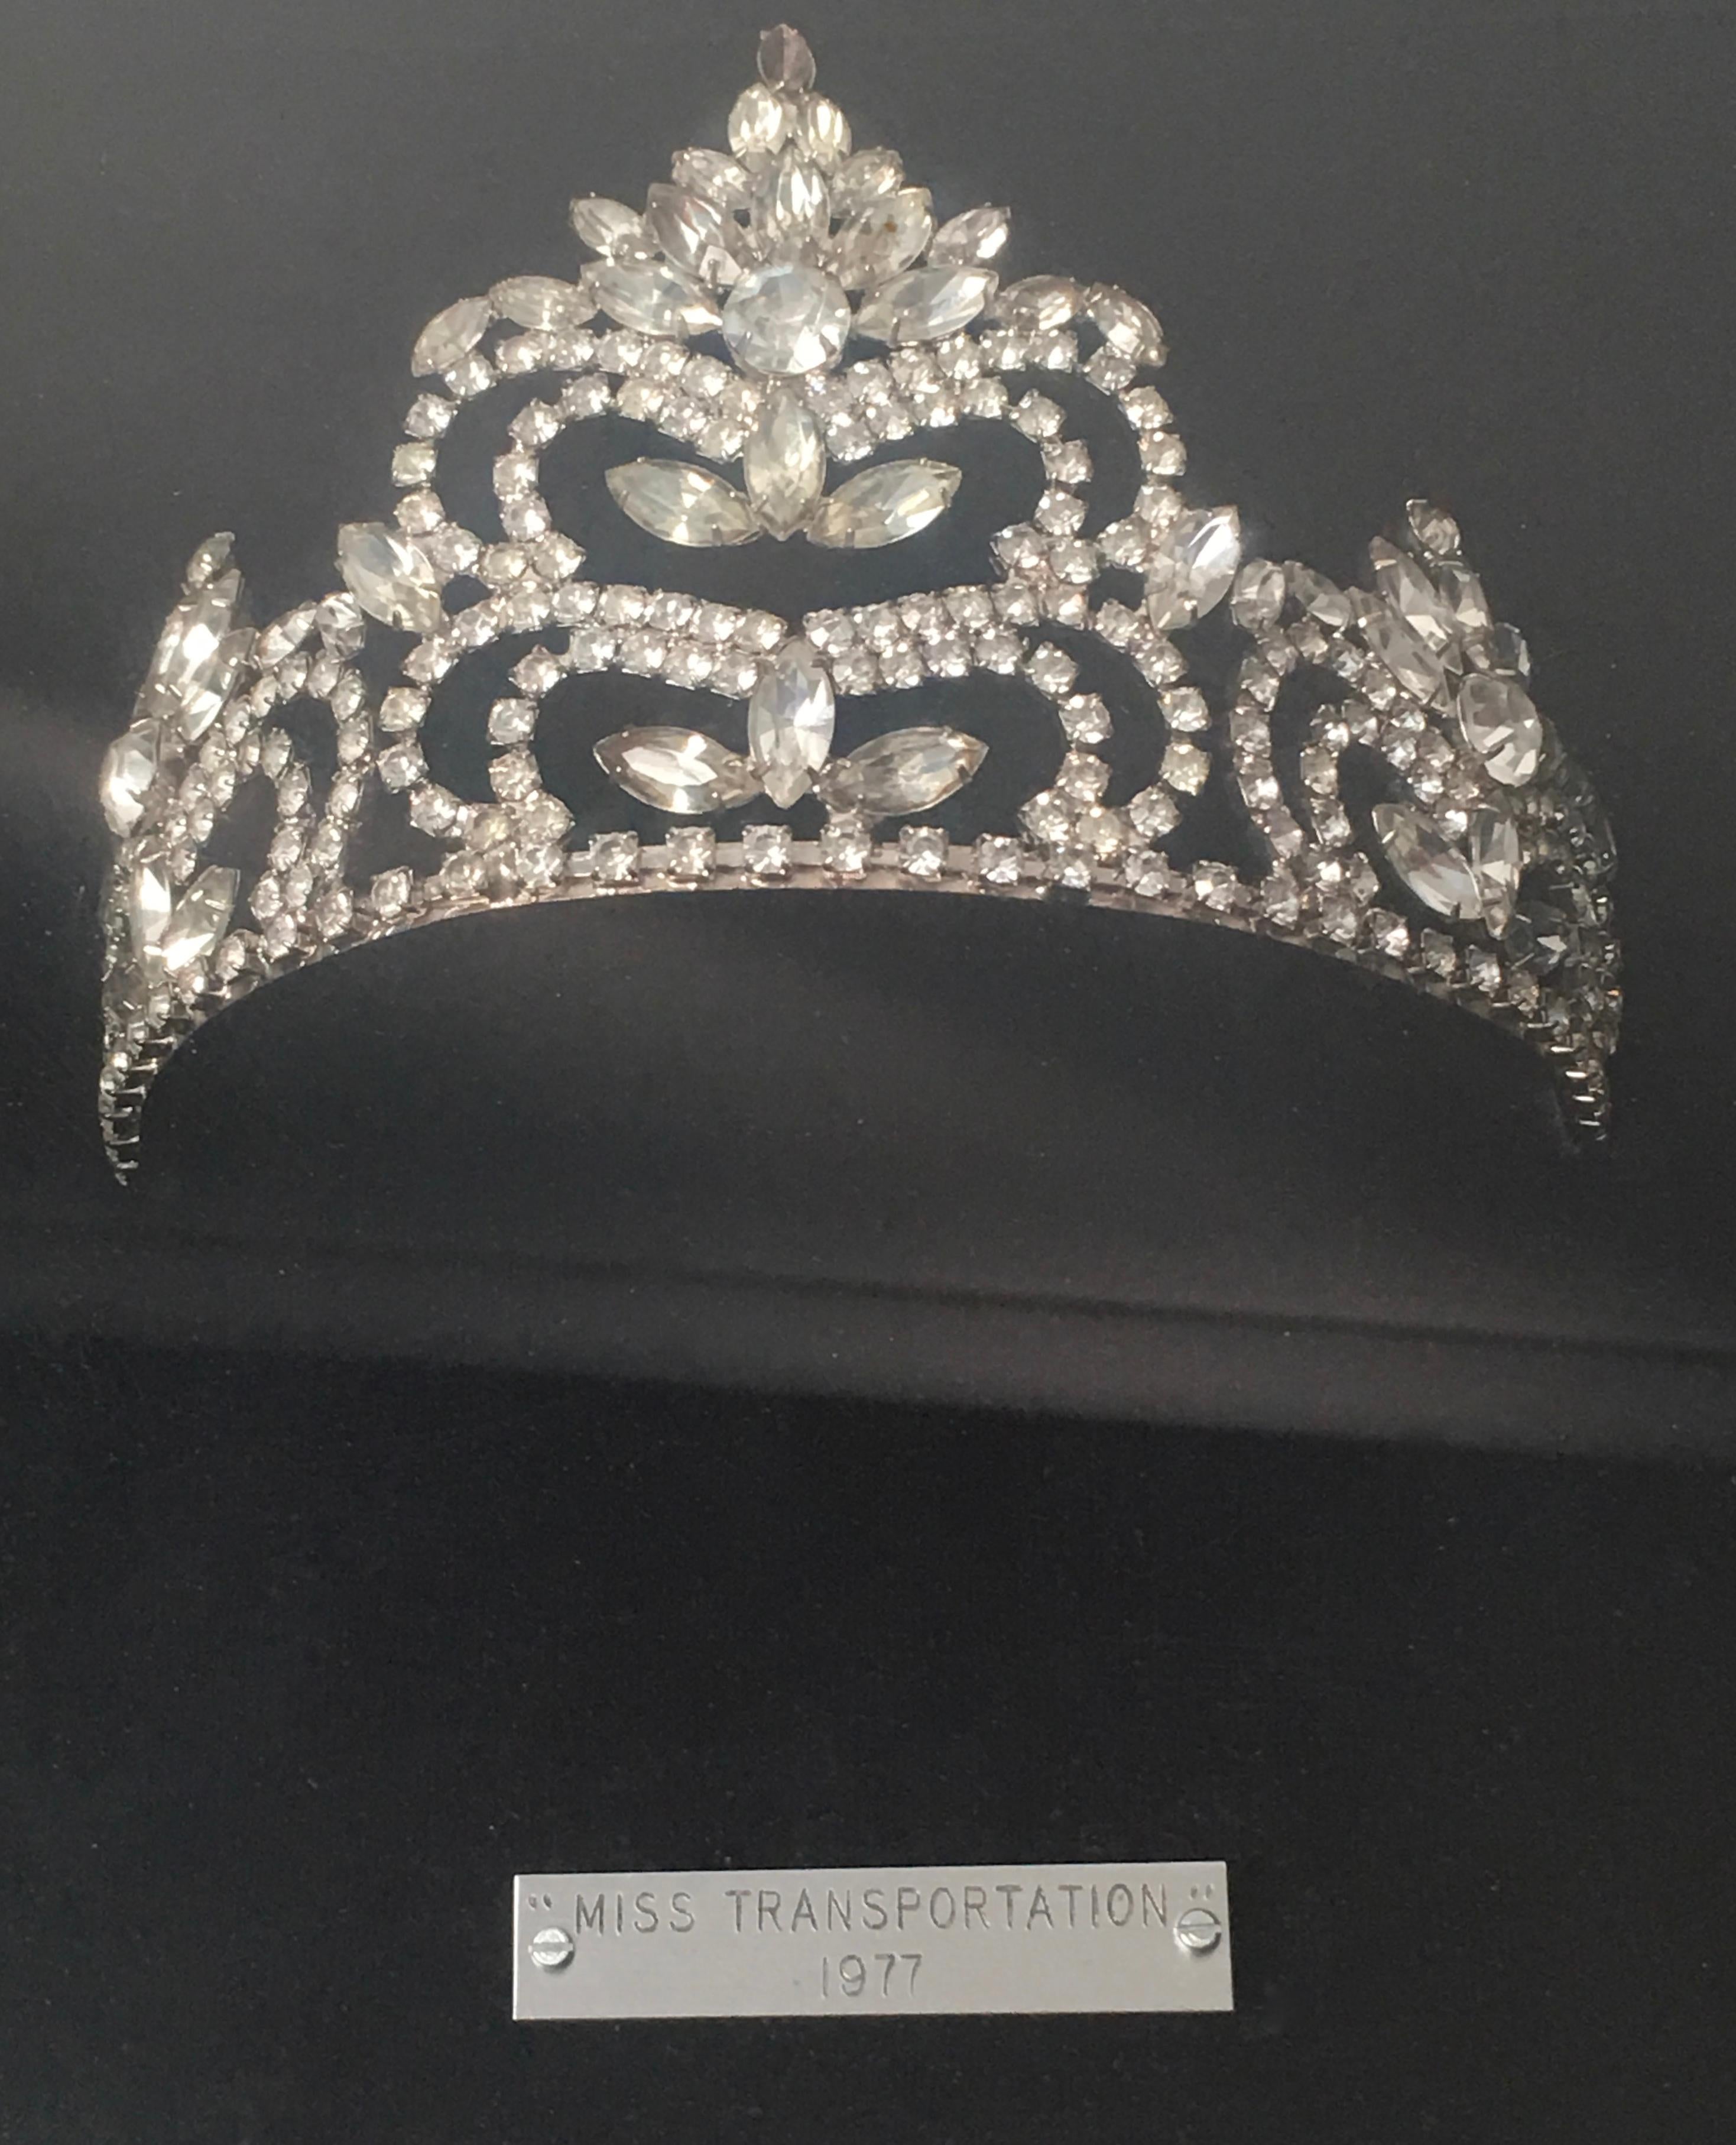 A rhinestone tiara which was used to crown Miss Transportation in 1977, mounted in a black velvet line deep shadow box with a silvered wood frame.